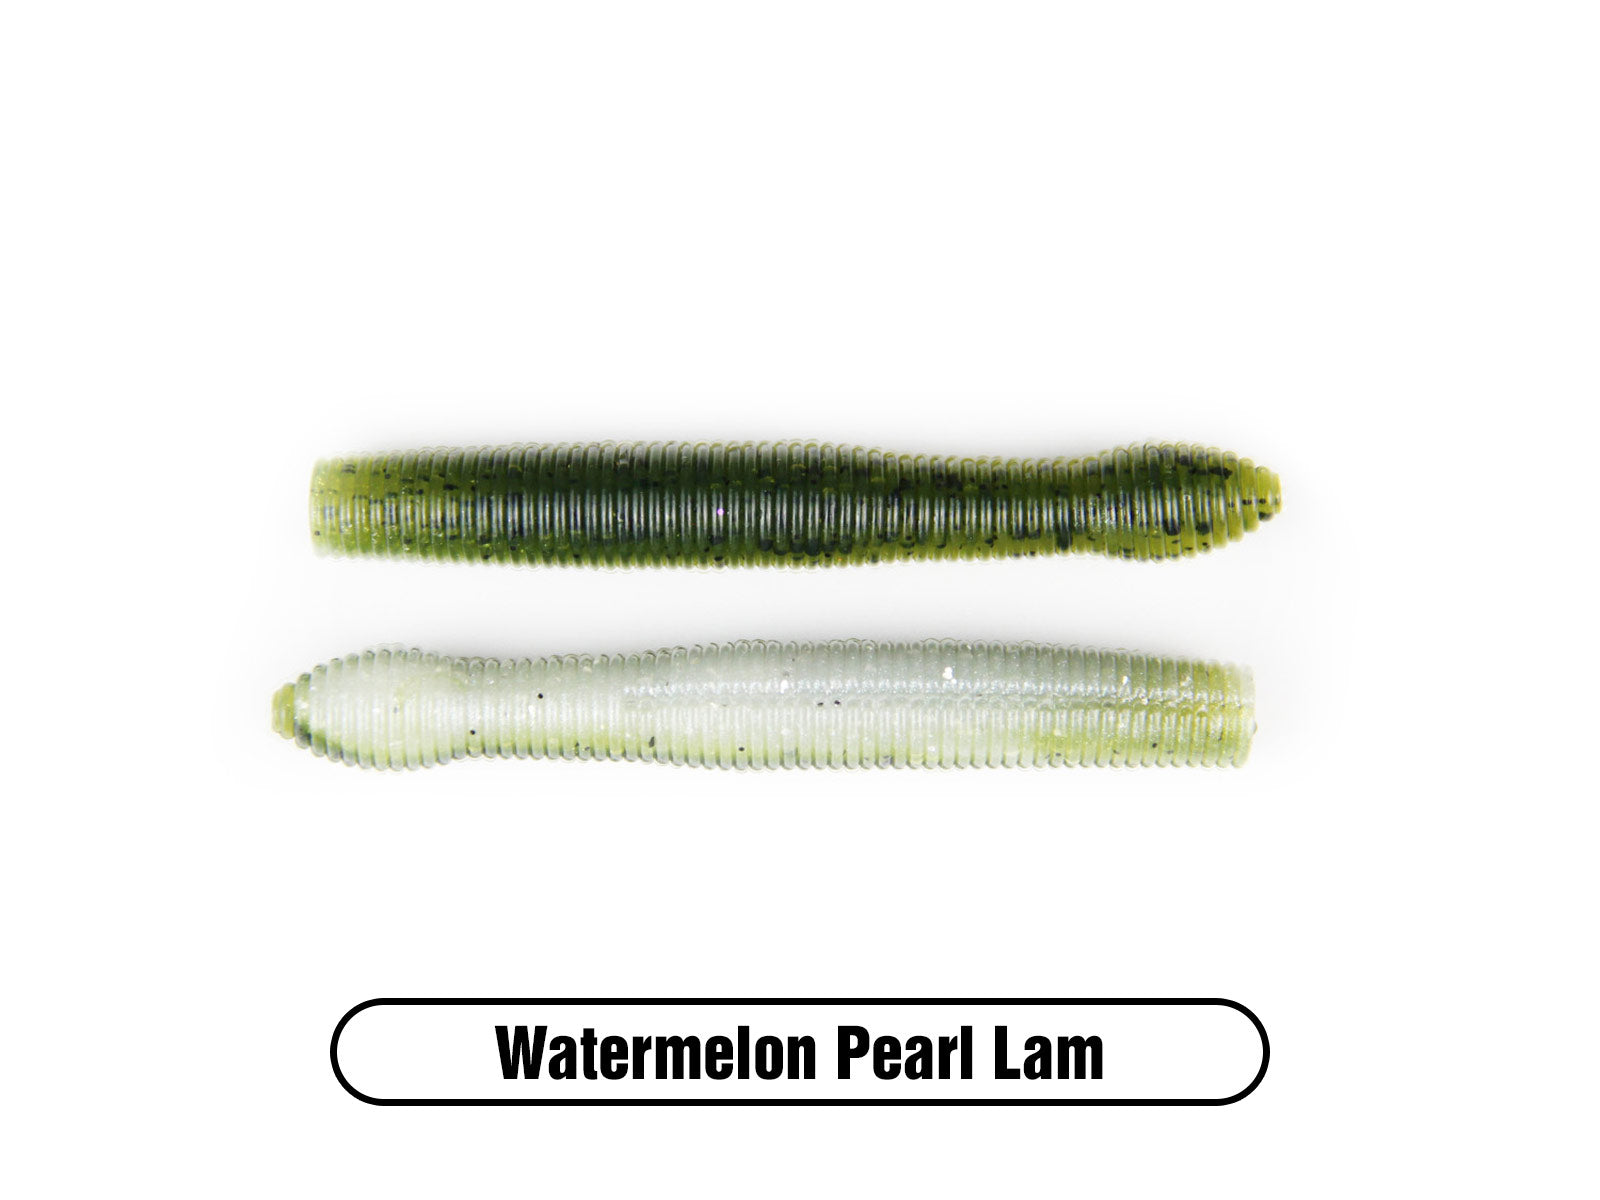 Lead Ned Rig Jig (5 Pack) – X Zone Lures